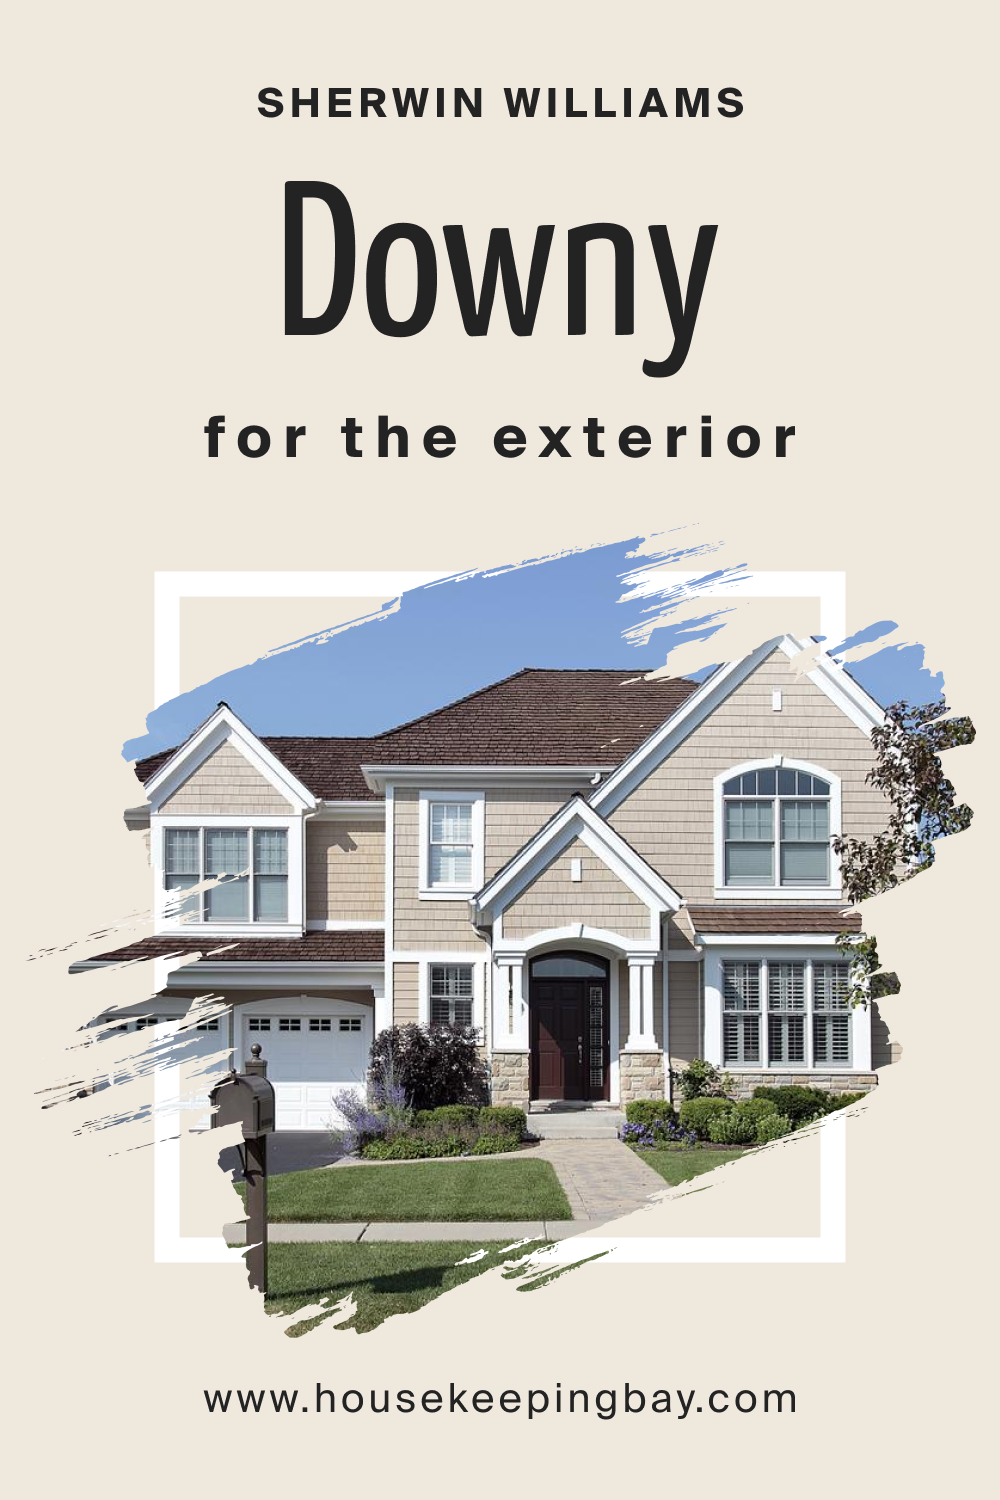 Sherwin Williams. SW Downy For the exterior